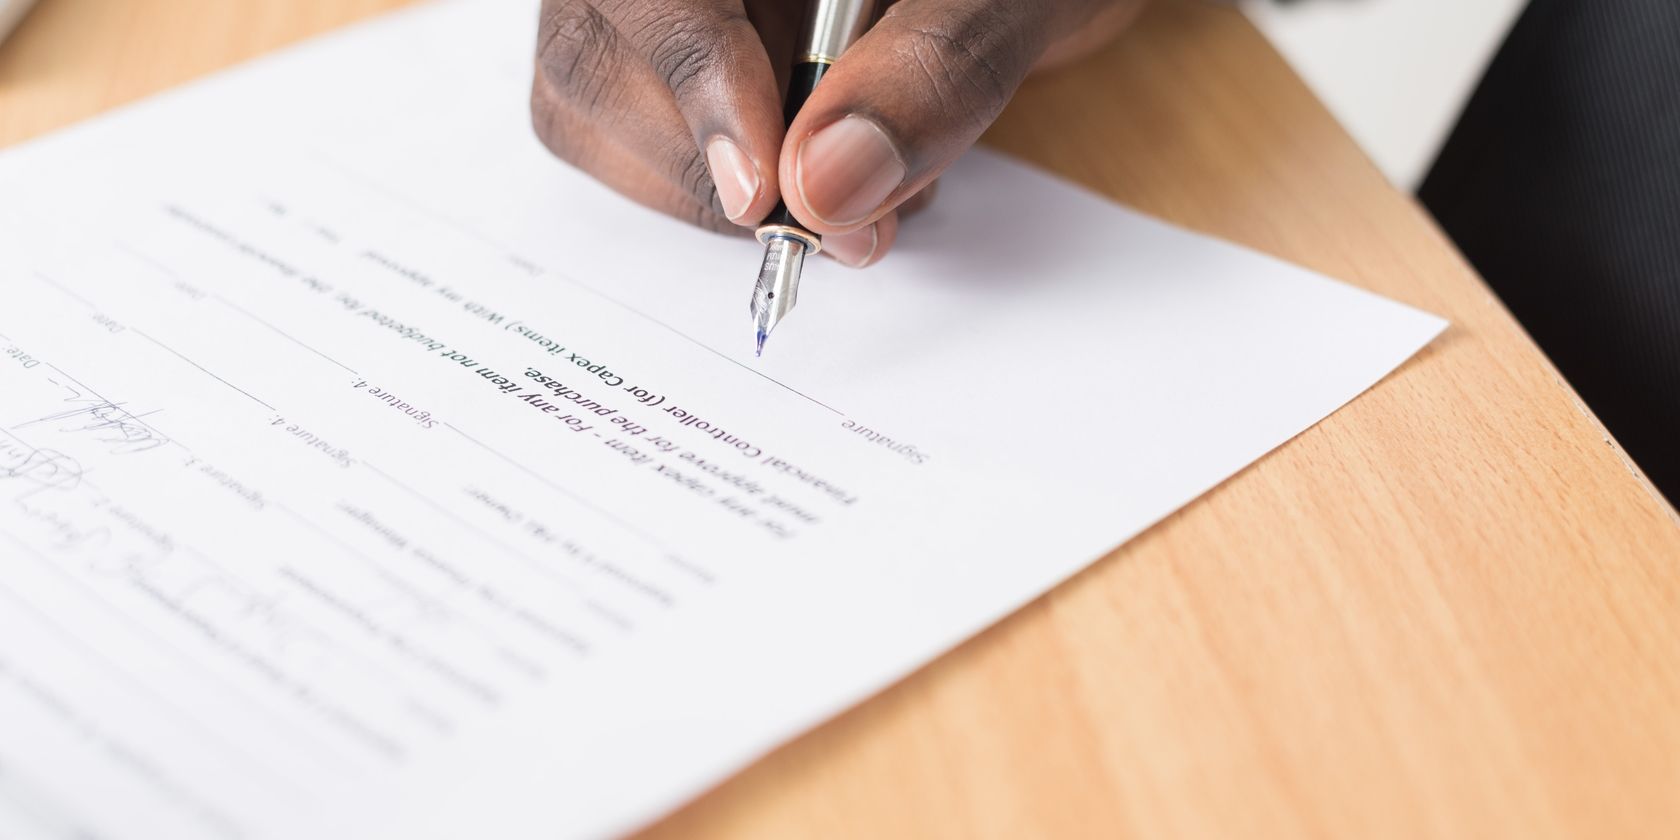 A man's hand holding a pen signing a document.